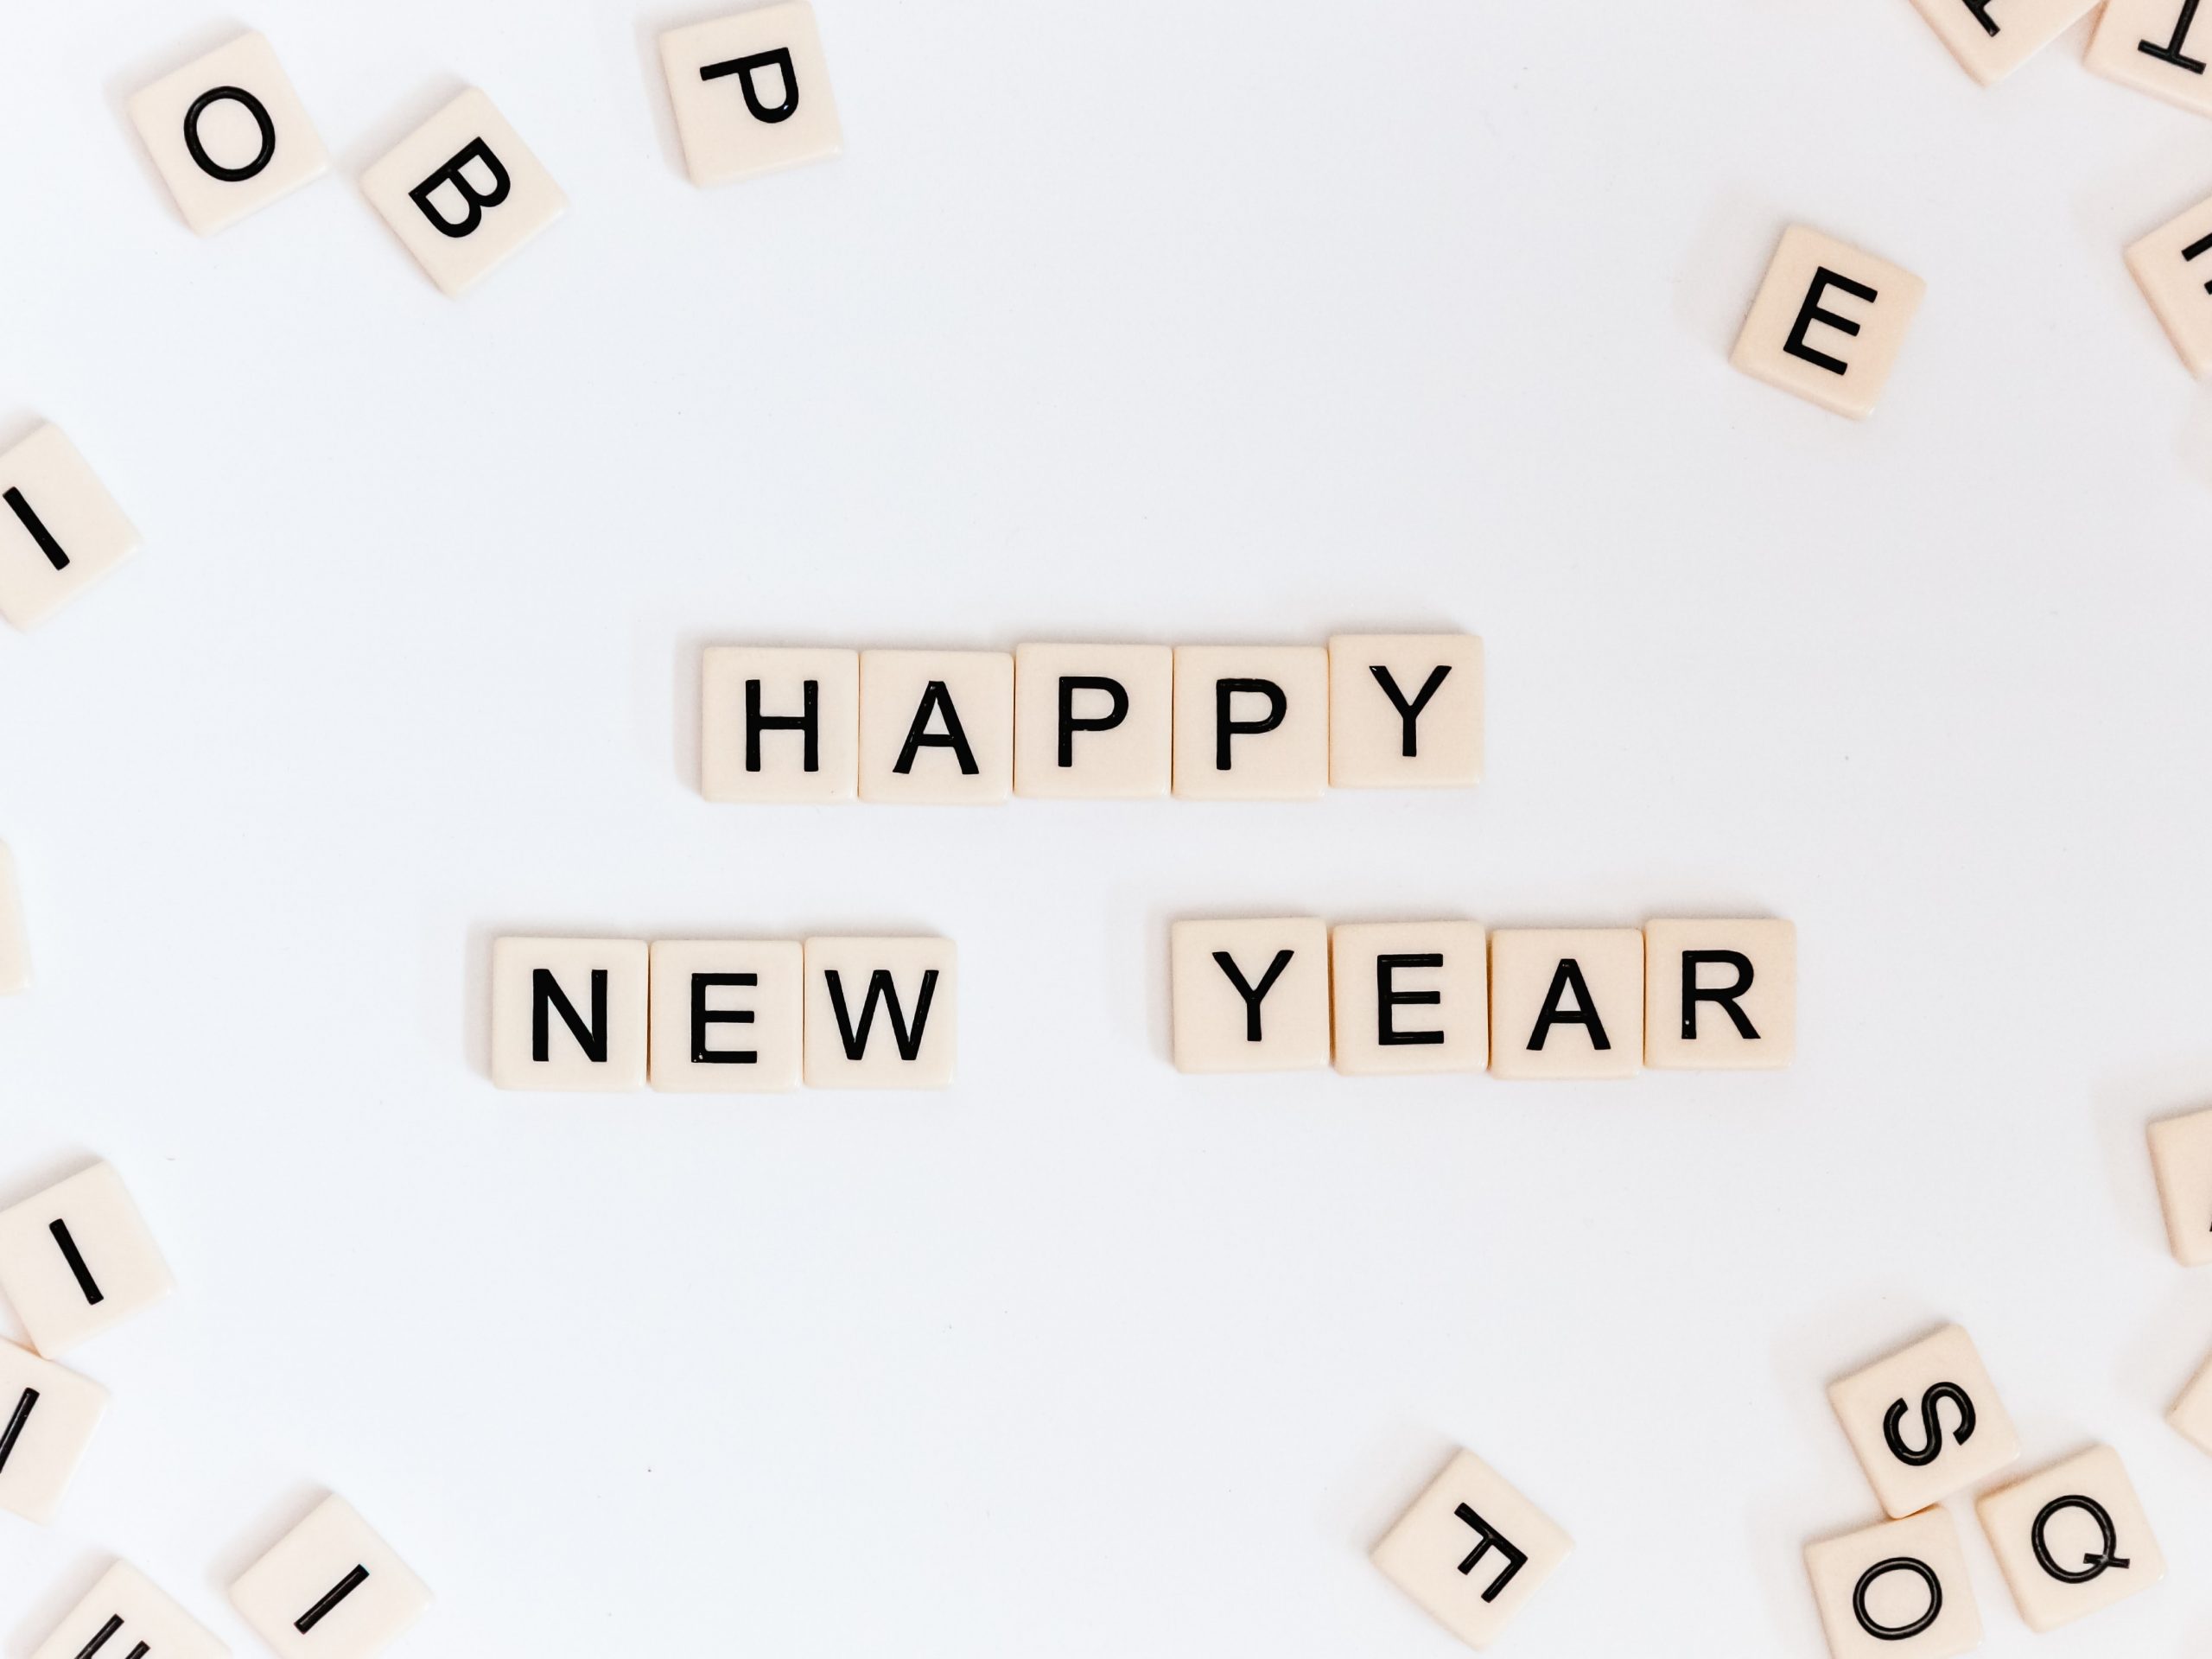 Happy new year on square tiles